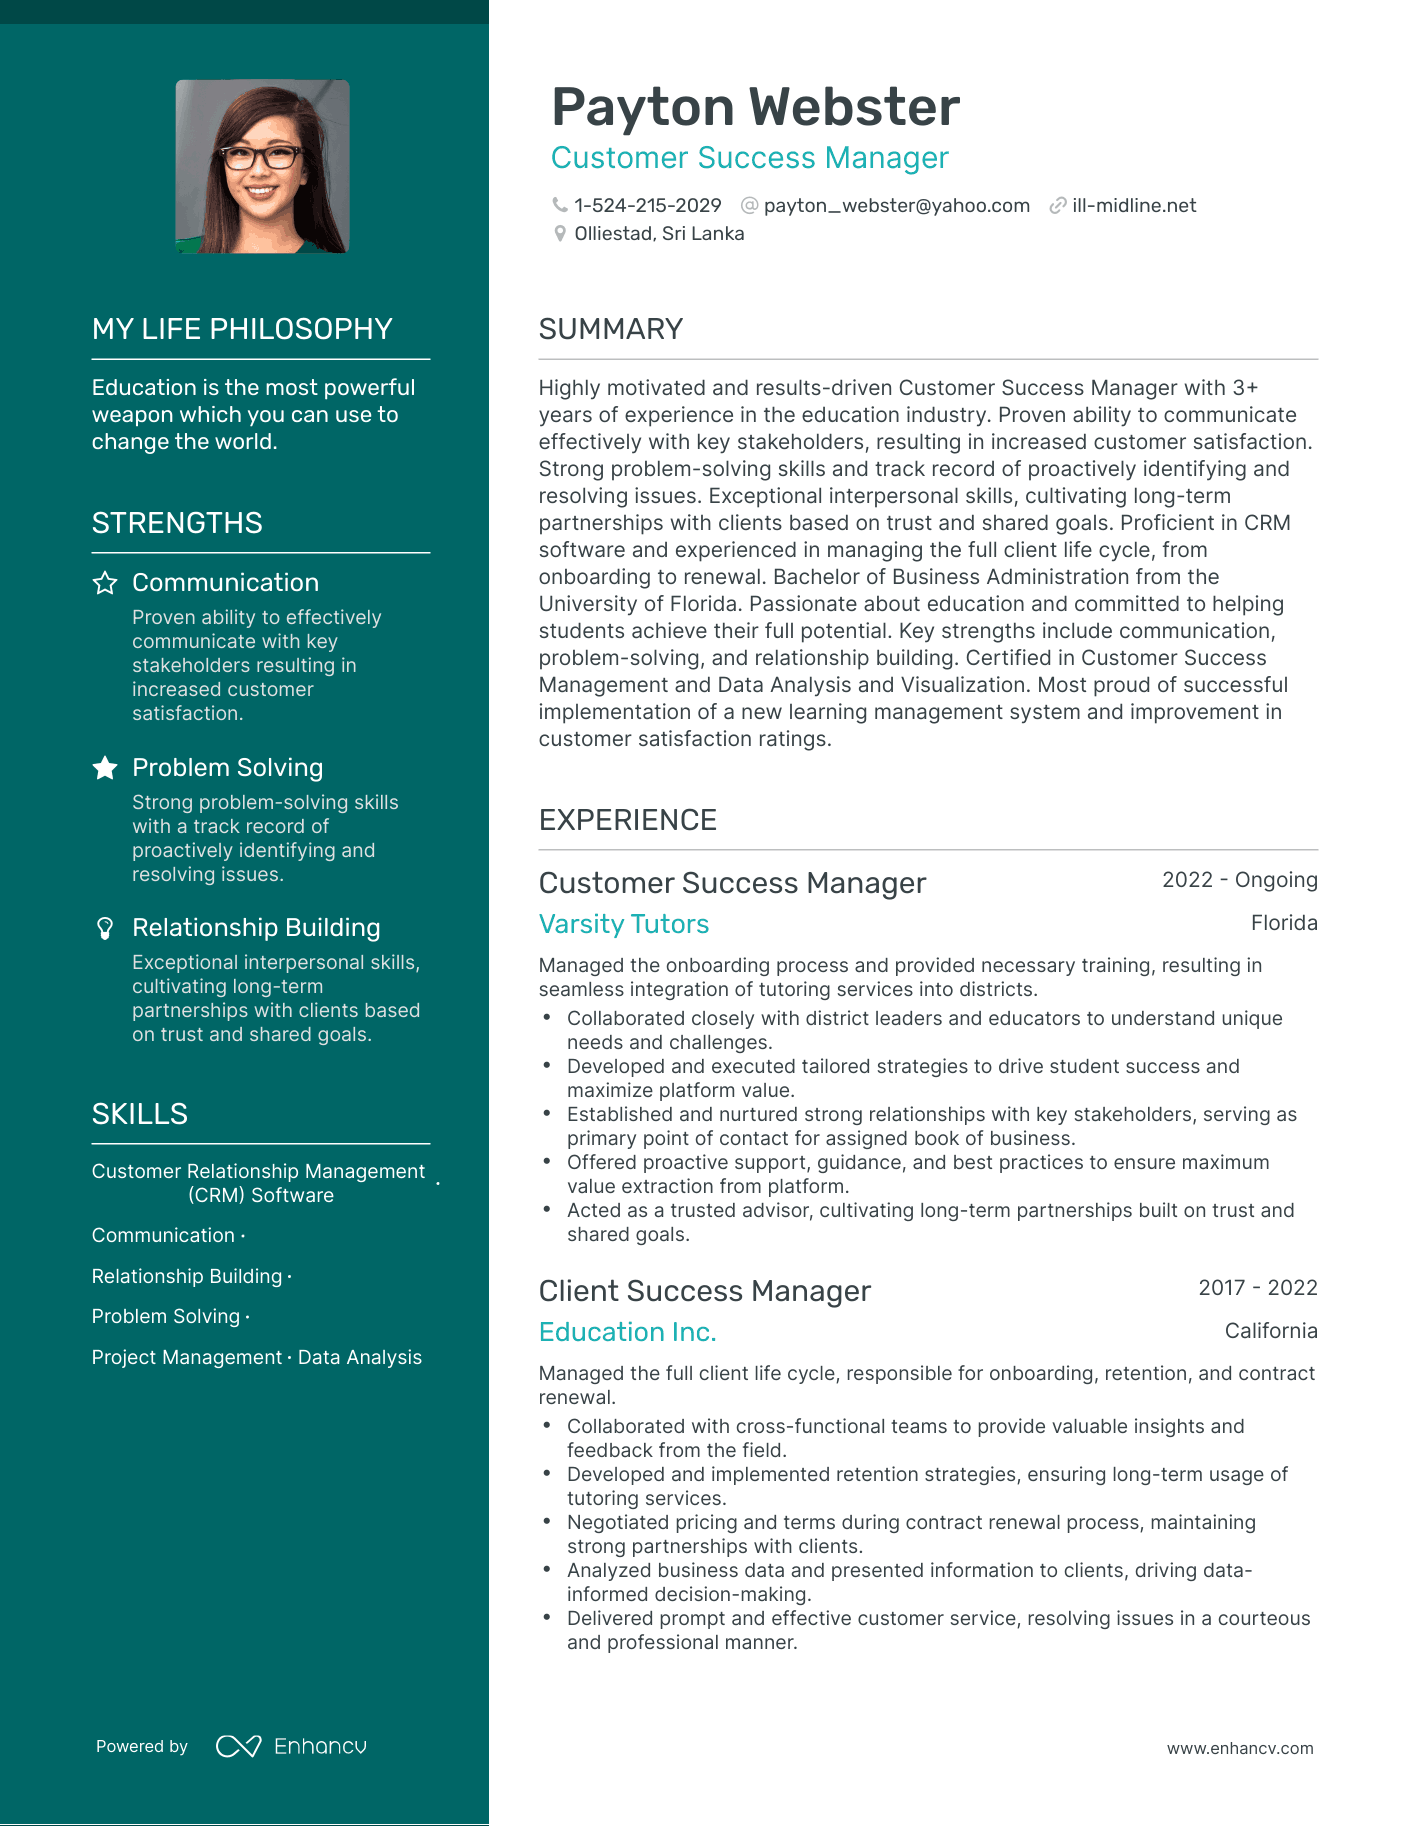 Customer Success Manager resume example